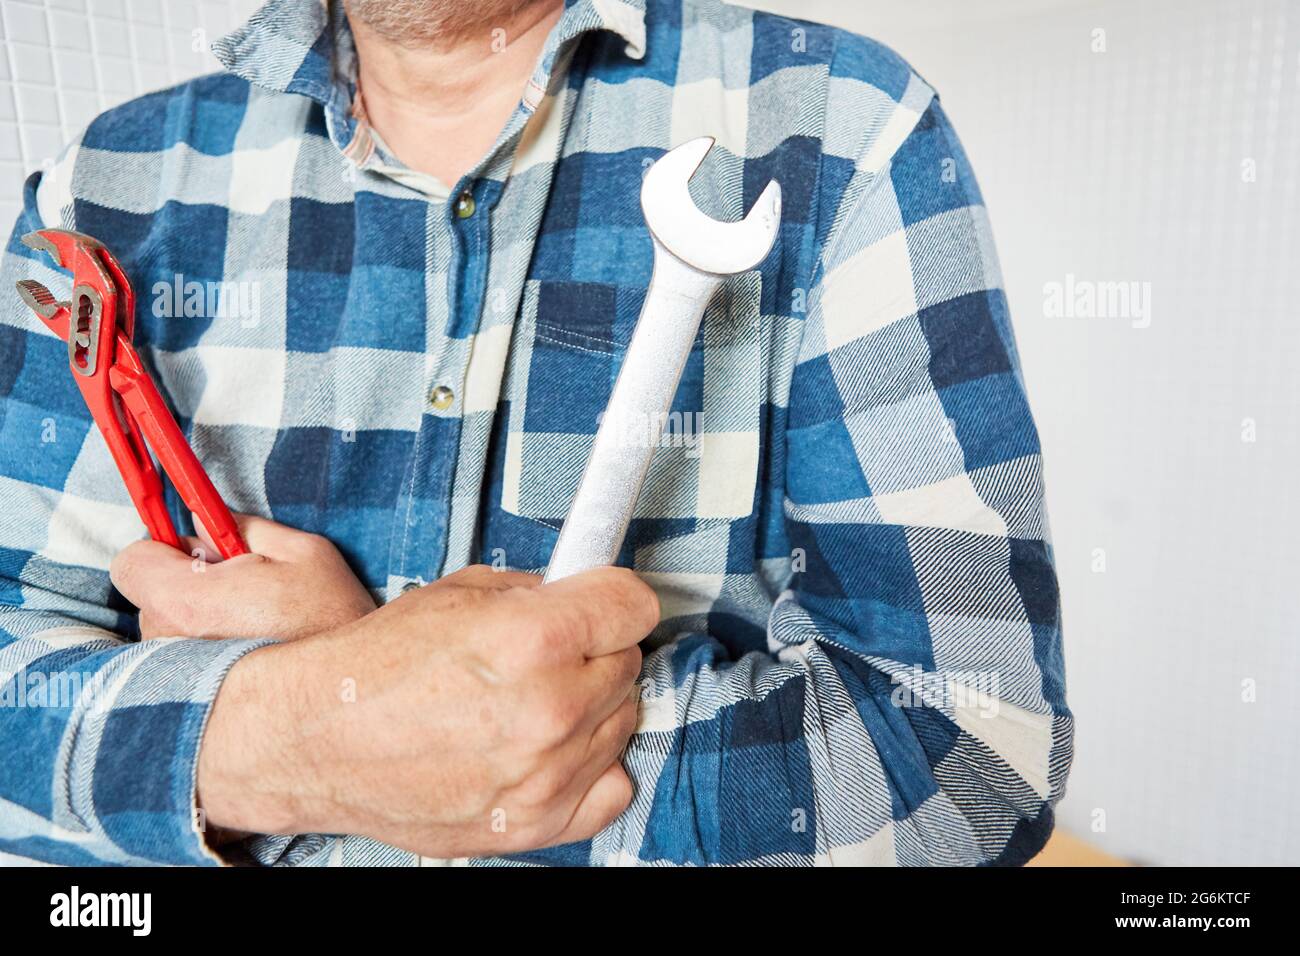 Craftsman with pipe wrench and wrench as a symbol of craftsmanship and competence Stock Photo